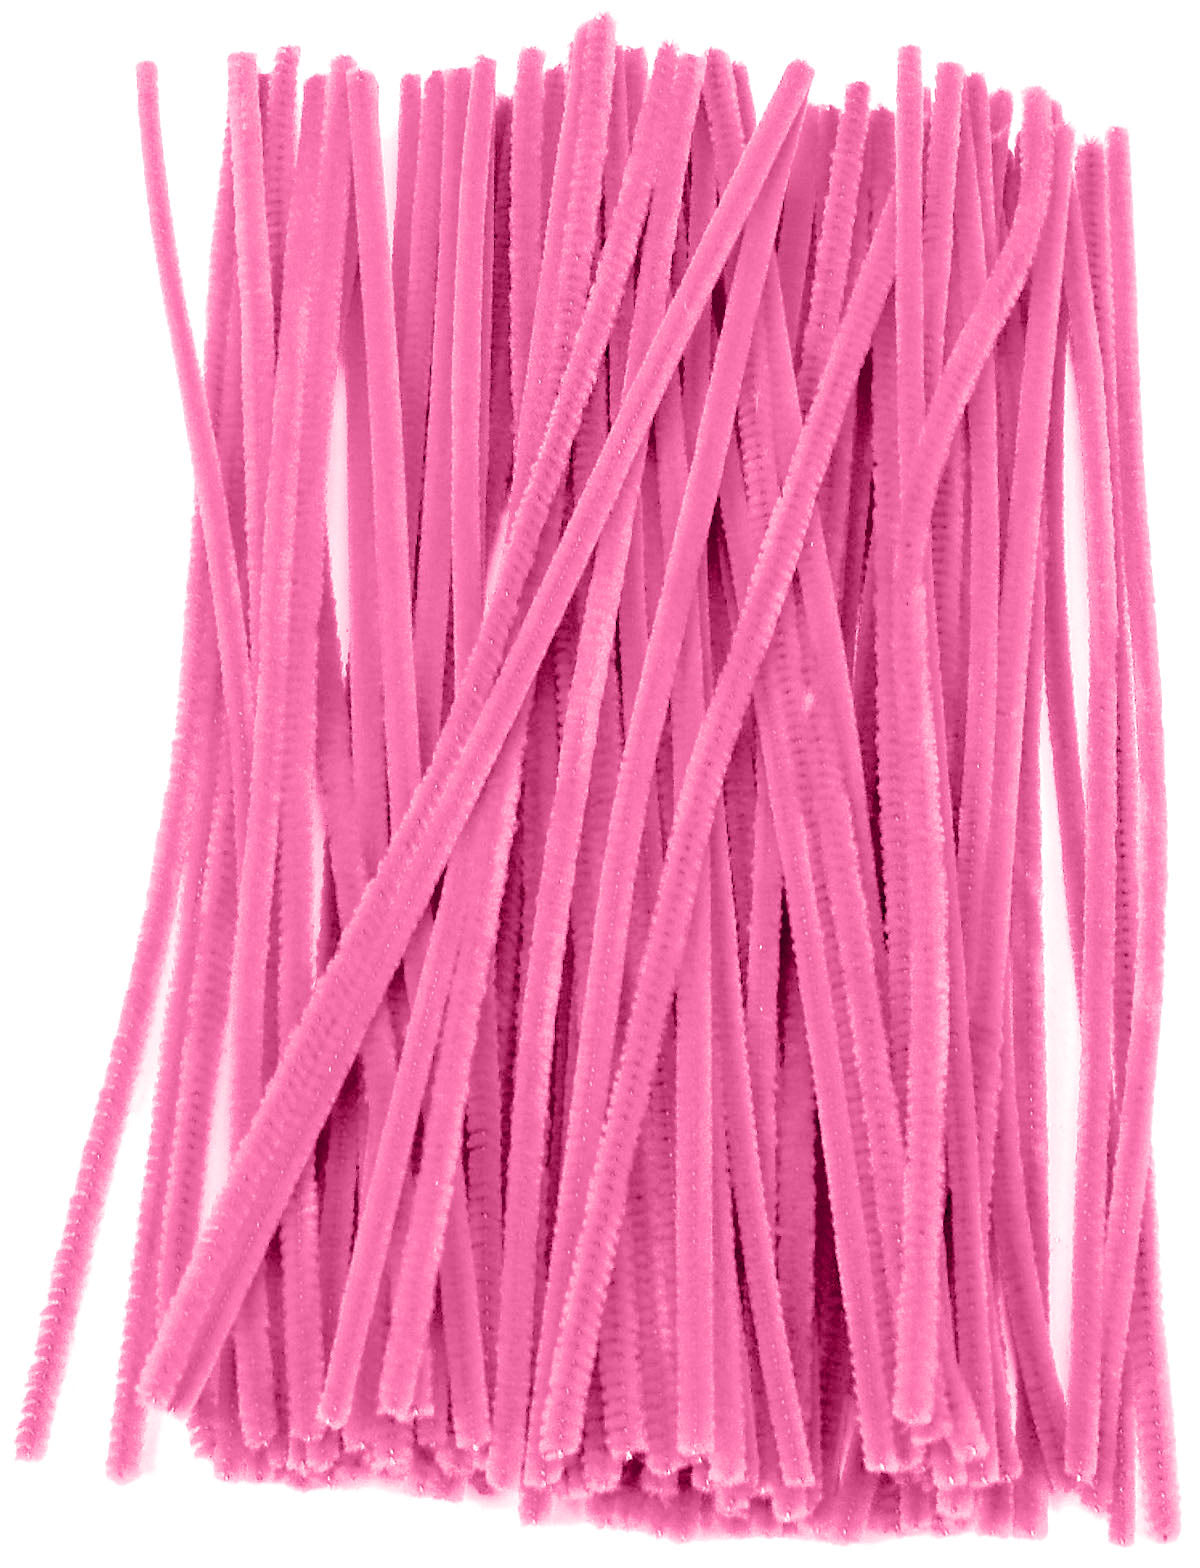 12" Pipe Cleaner Stems: 6mm Chenille Pink (100)